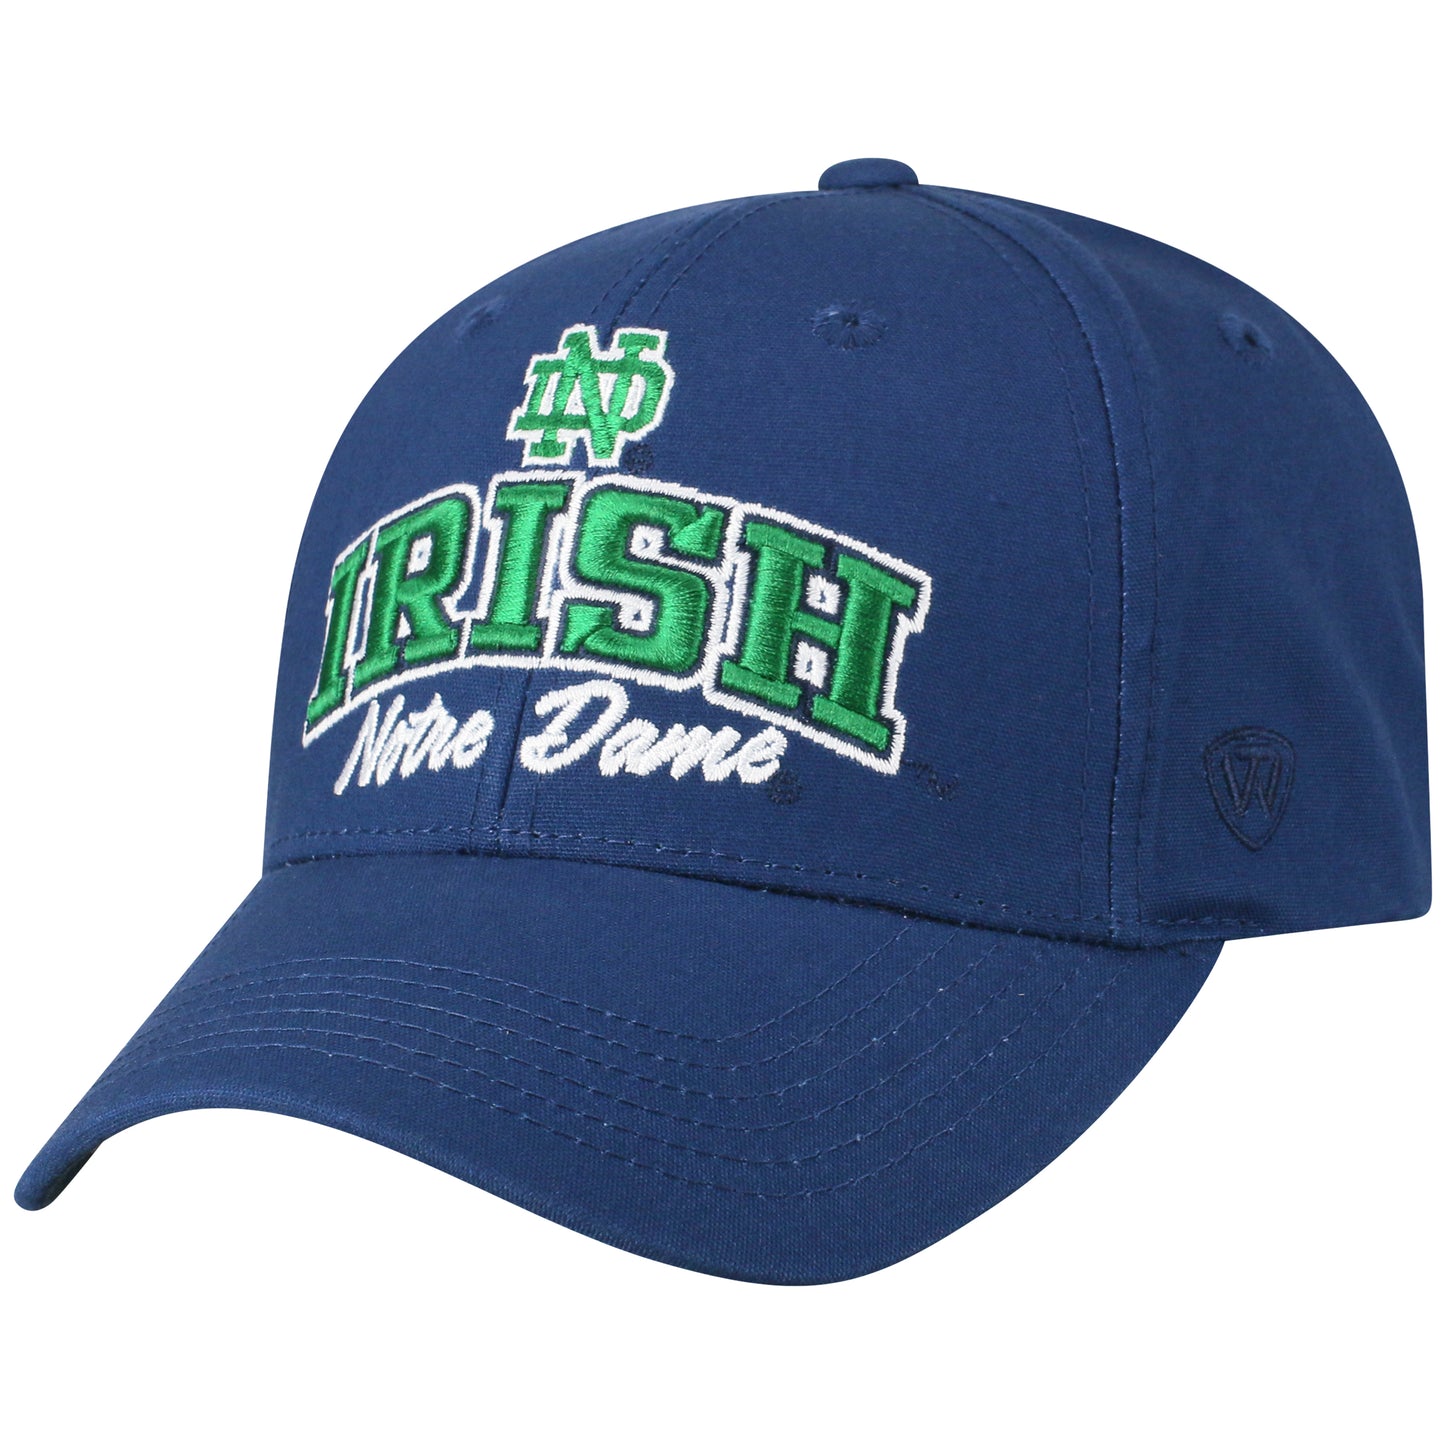 Mens Notre Dame Fighting Irish Advisor Adjustable Hat By Top Of The World